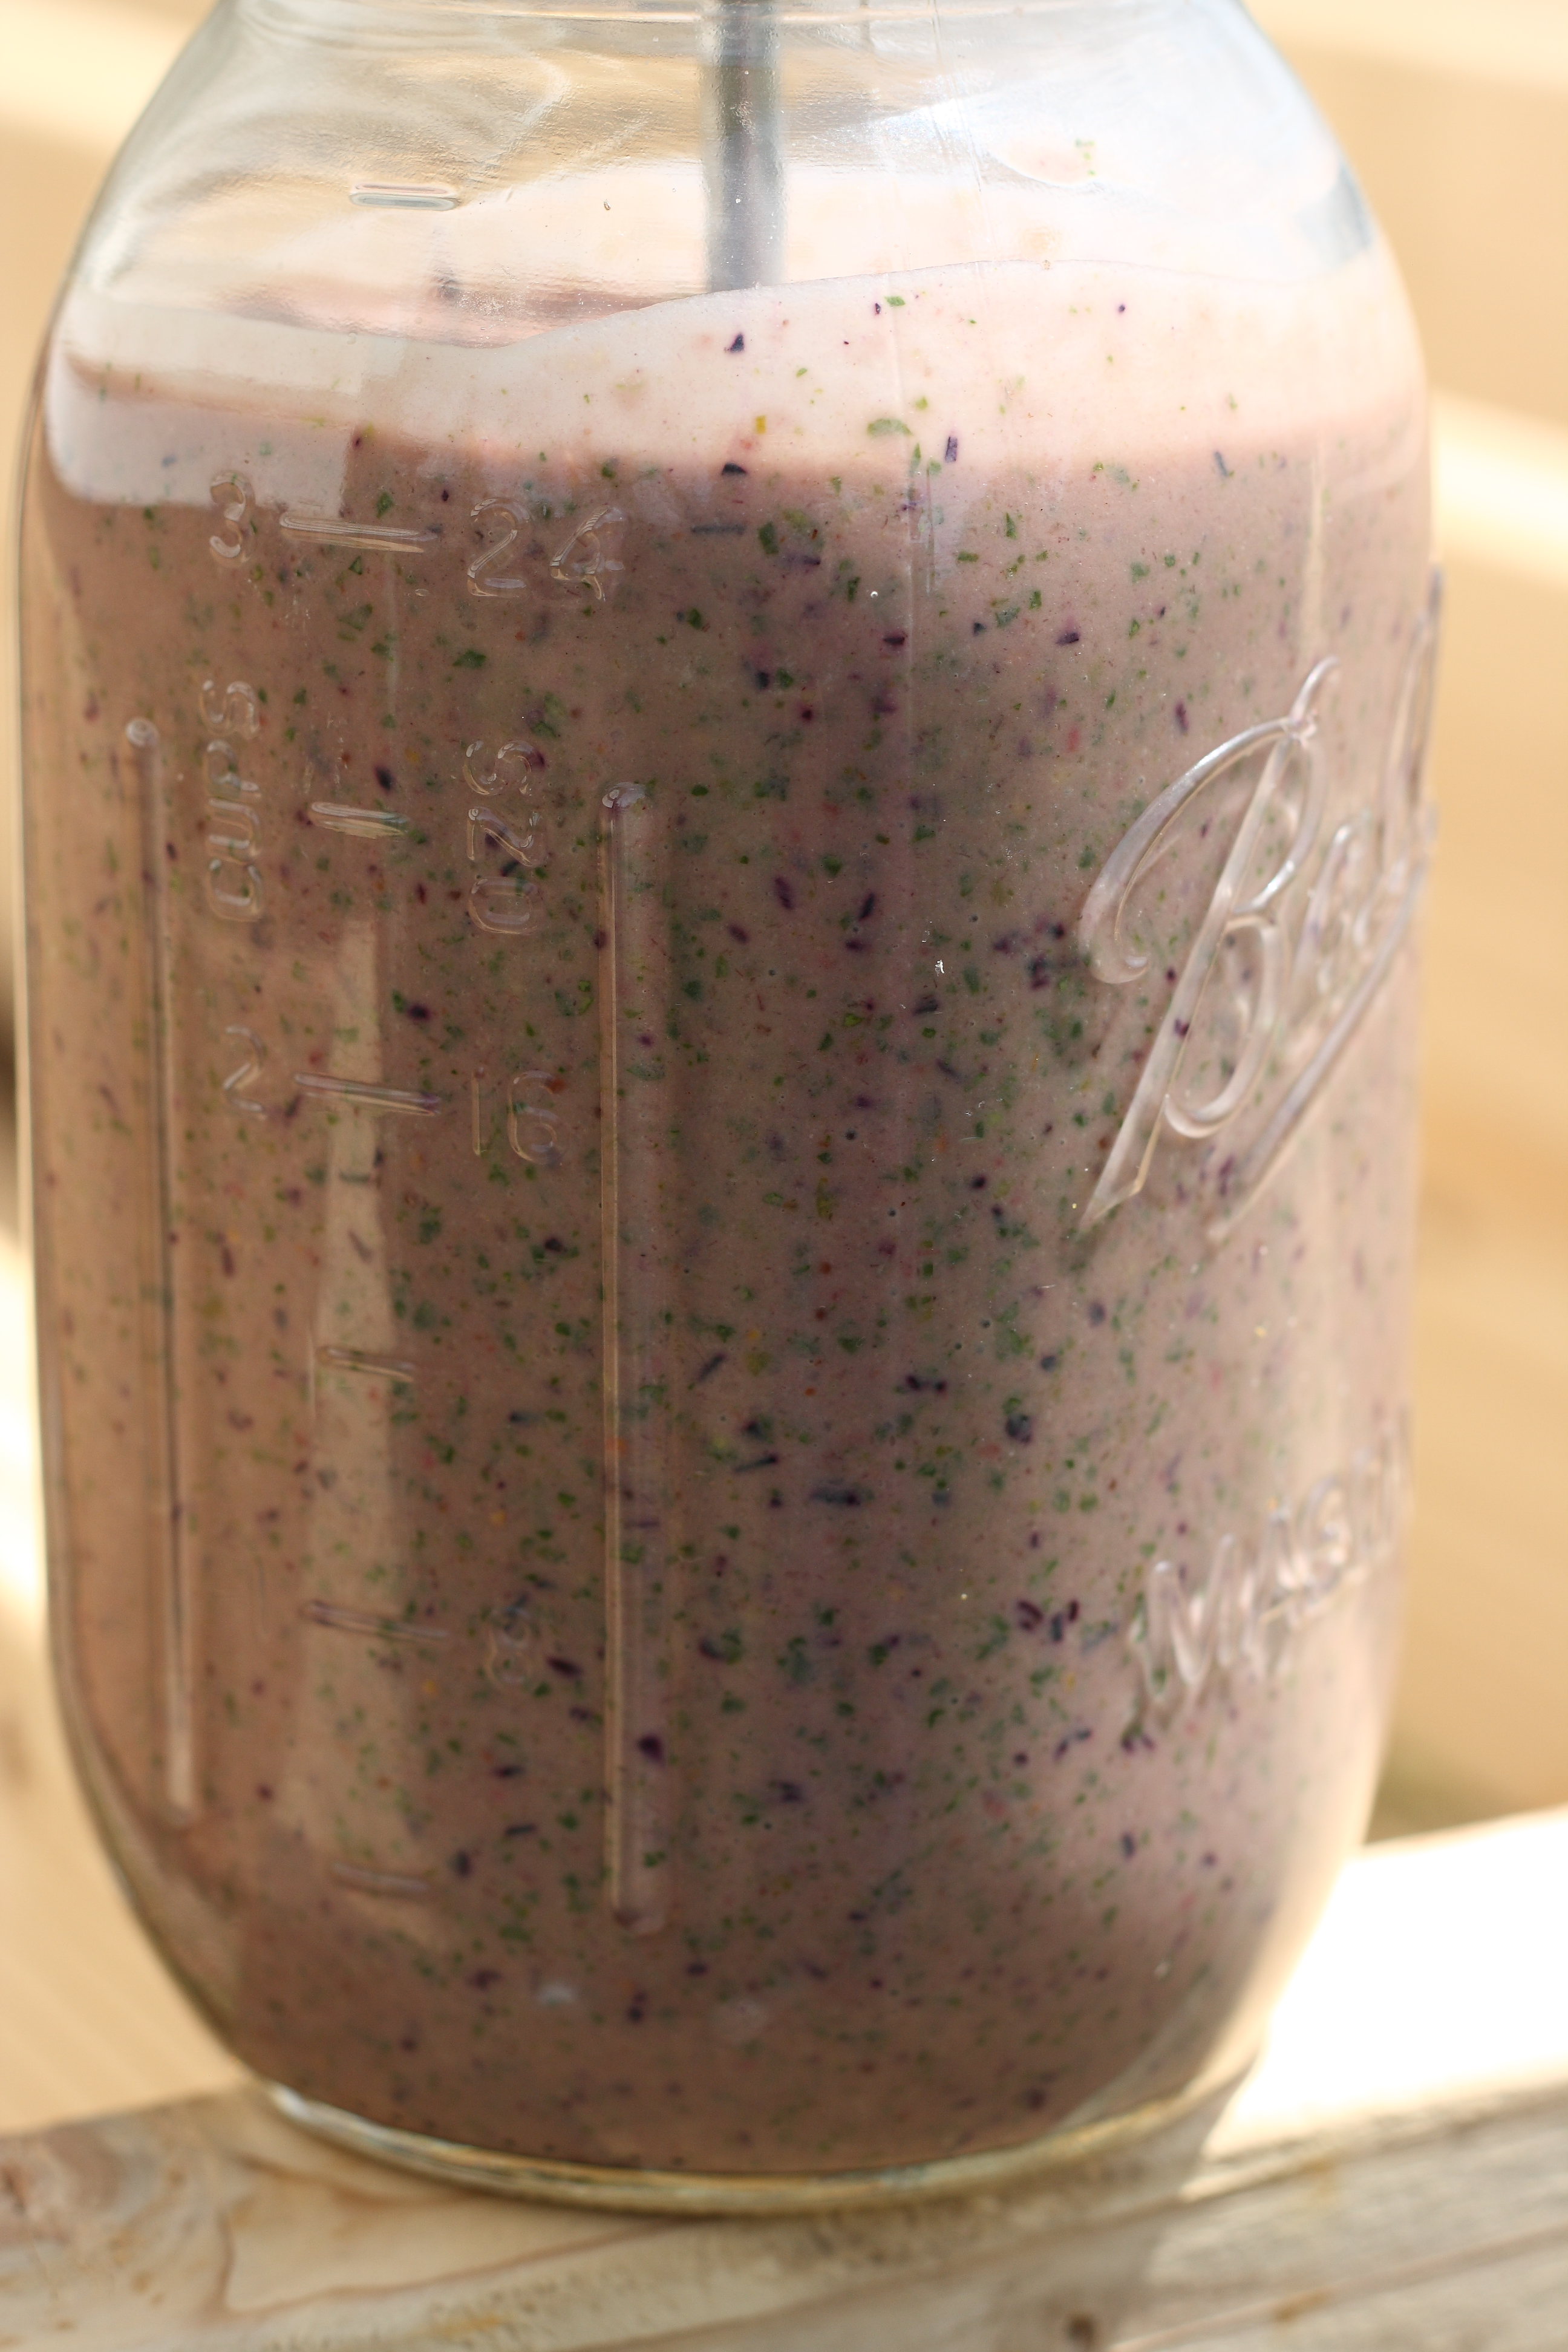 Post Exercise Workout Smoothie Recipe #BBBProduct #freshfruitbowl - For Him  and My Family